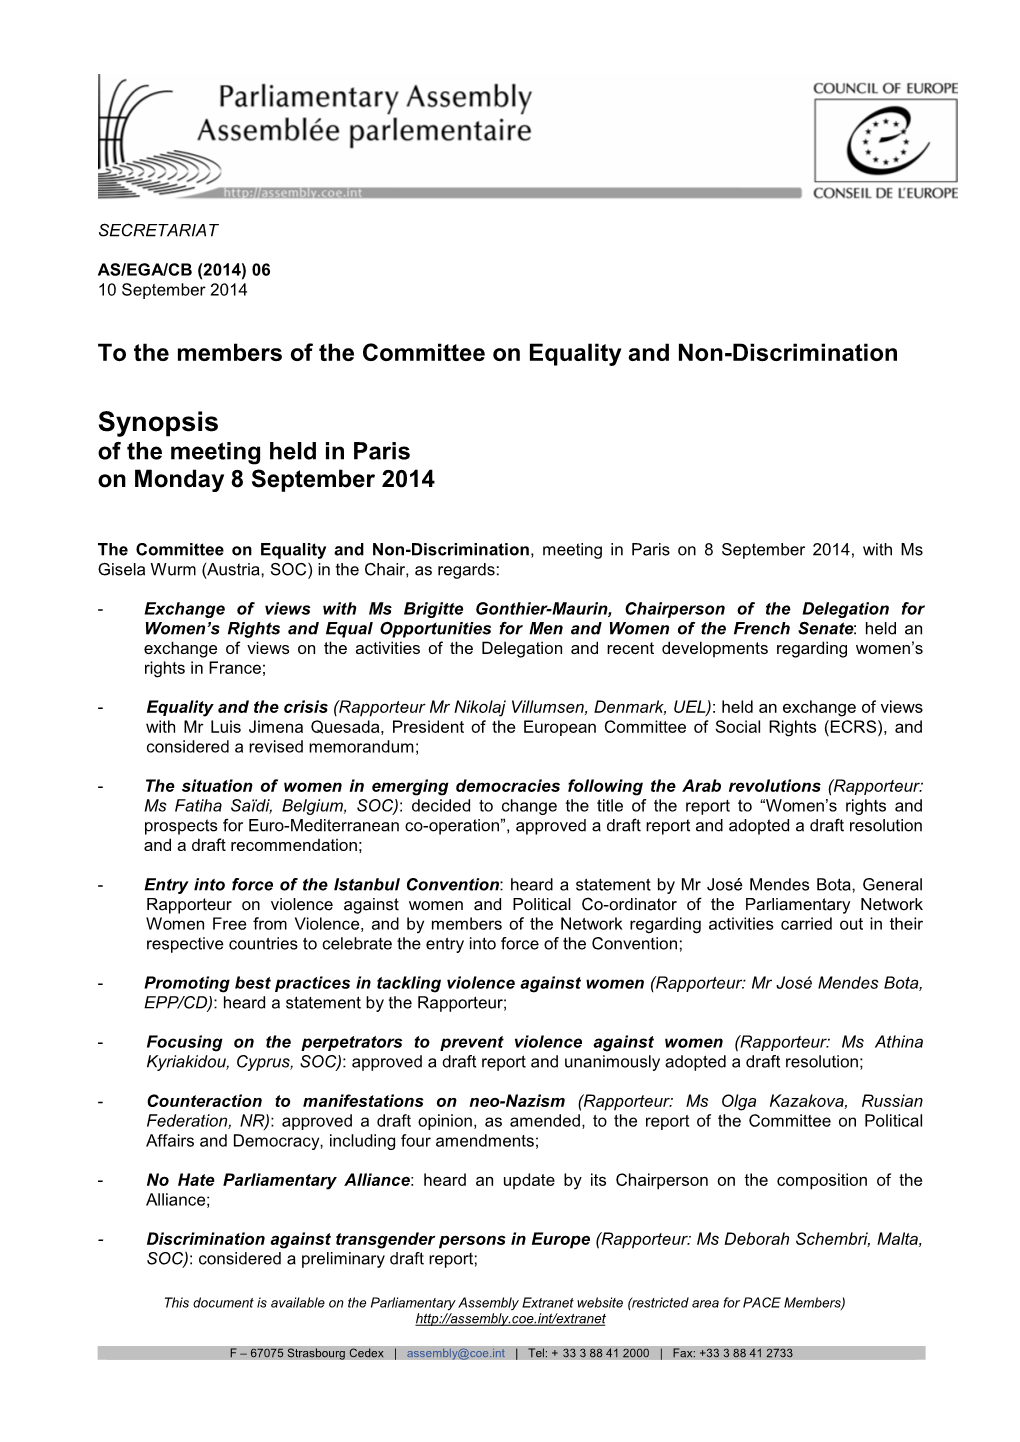 Synopsis of the Meeting Held in Paris on Monday 8 September 2014